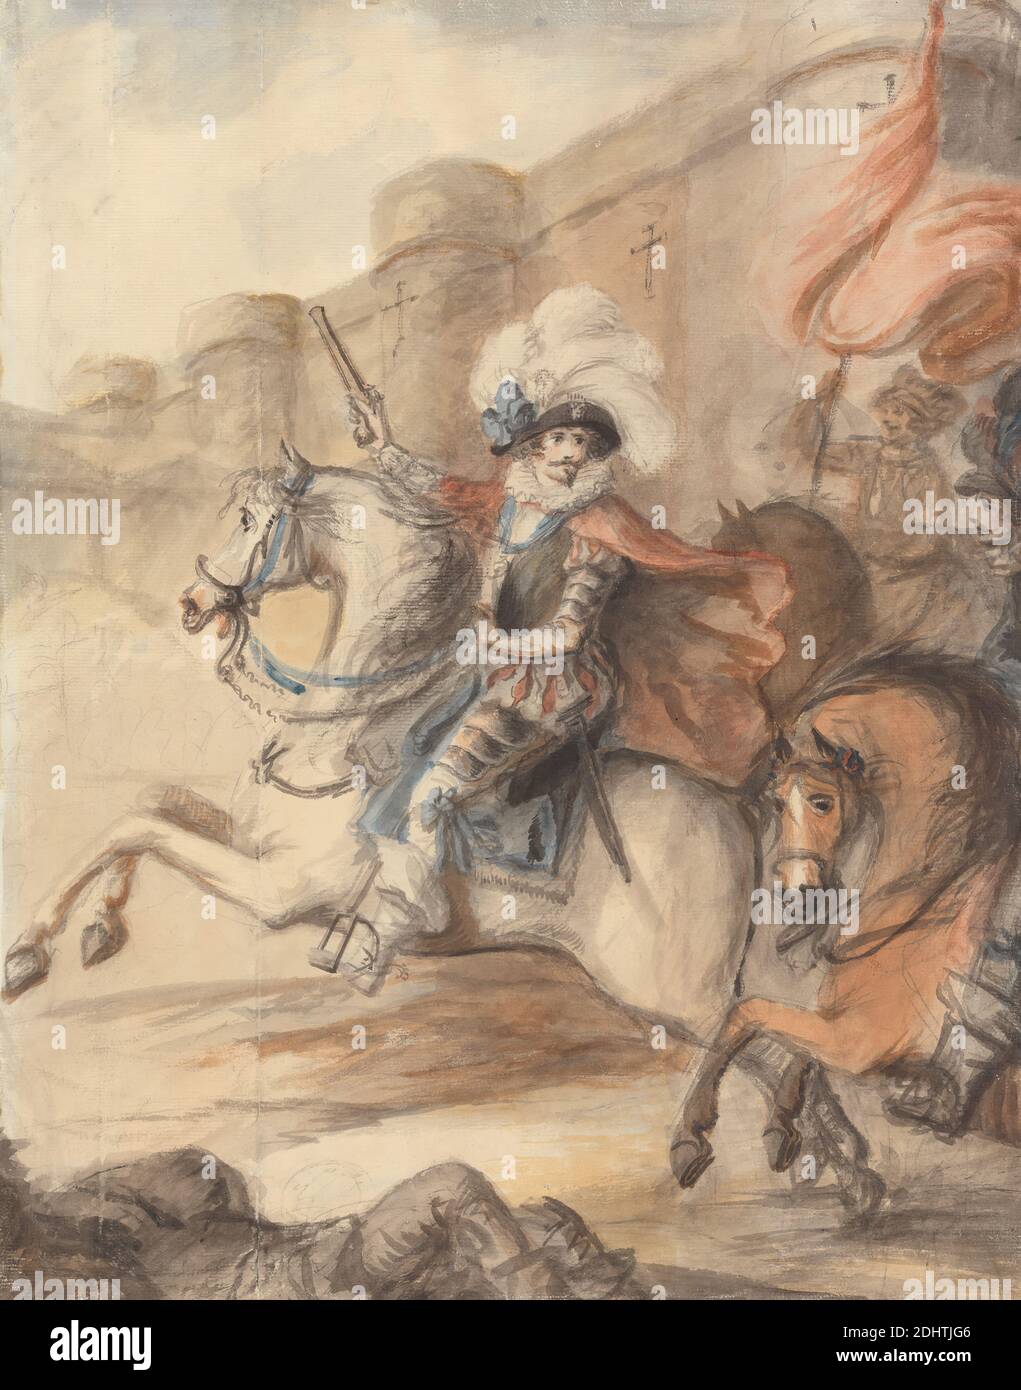 A Cavalry Officer (Henry IV) Leading a Charge Outside a Castle, Henry William Bunbury, 1750–1811, British, undated, Watercolor, graphite and black chalk on moderately thick, moderately textured, cream, laid paper, Sheet: 20 × 15 13/16 inches (50.8 × 40.2 cm), animal art, armor, attacking, battle, boots, breeches, bridles, castle, cavalry, cloak, flags, gun (small arm), hats, horses (animals), medal, men, military art, officer (military officer), play, ramparts, rearing (horse), ribbons, saddle blanket, slashing, soldiers, spurs, stirrups, sword, war Stock Photo